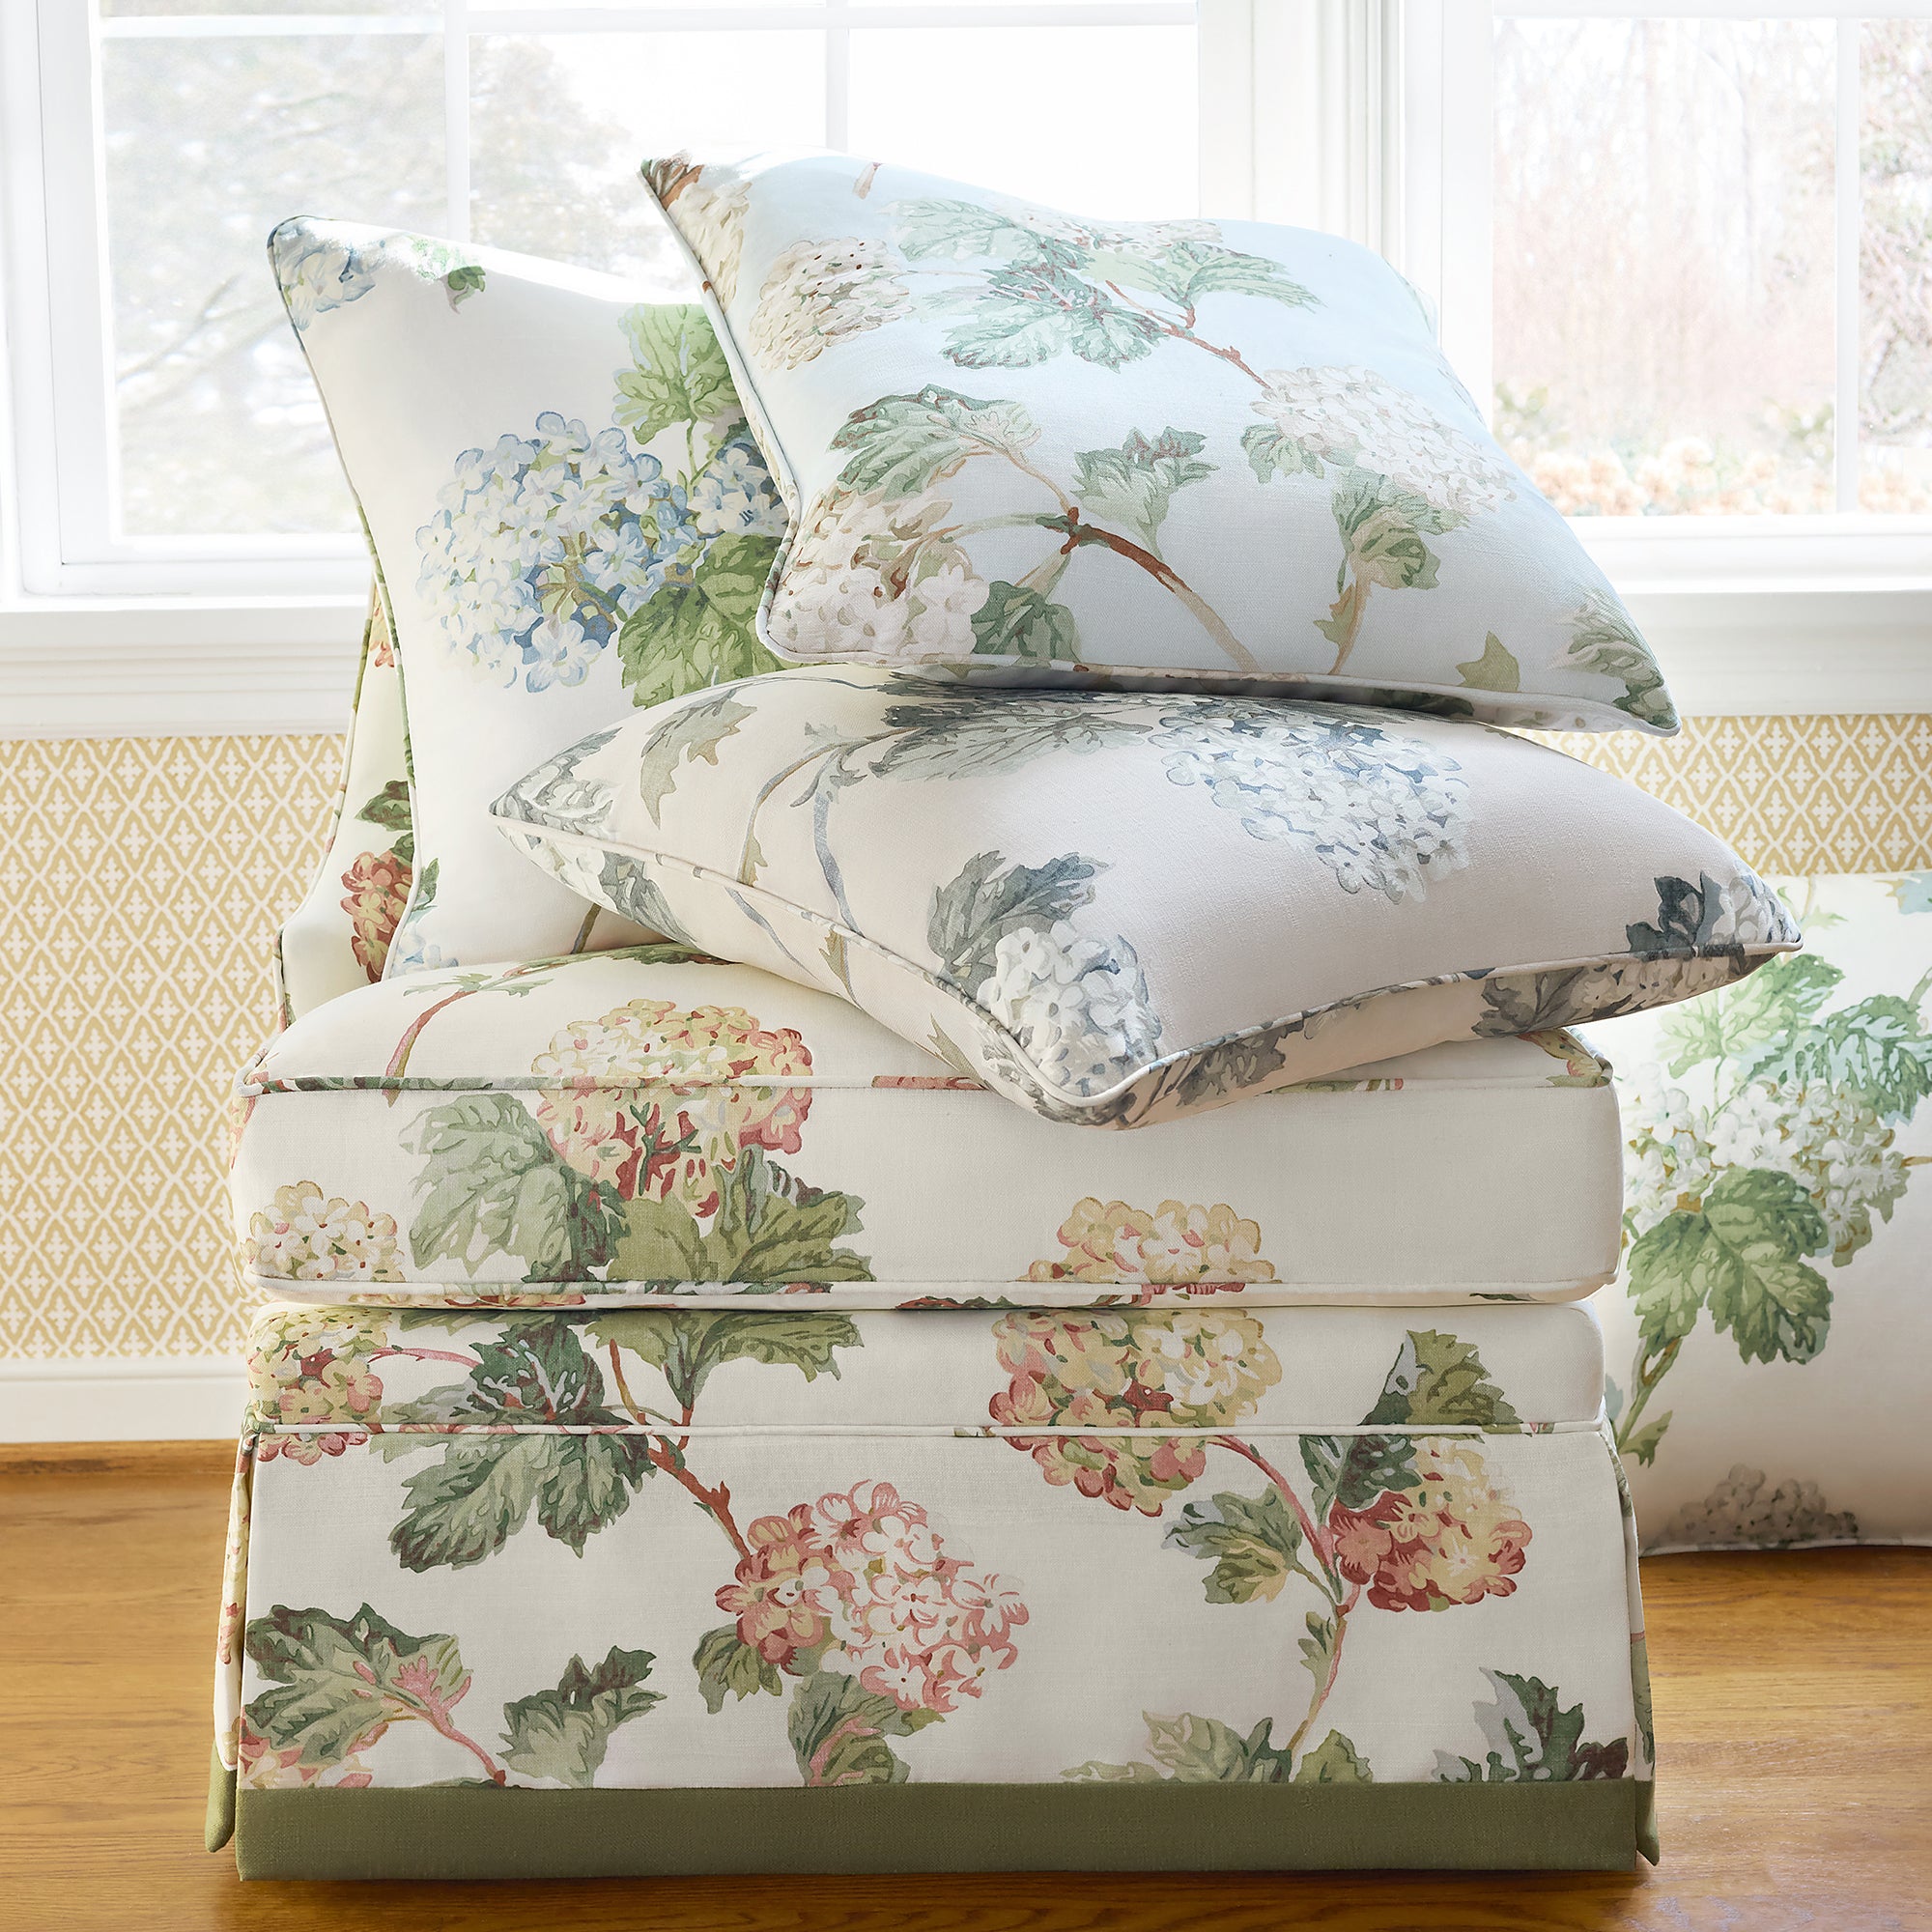 Collection of brentwood chair with skirt and pillow fabrics in Sussex Hydrangea printed fabric featuring blue and green color fabric - pattern number AF57846 - by Anna French in the Bristol collection